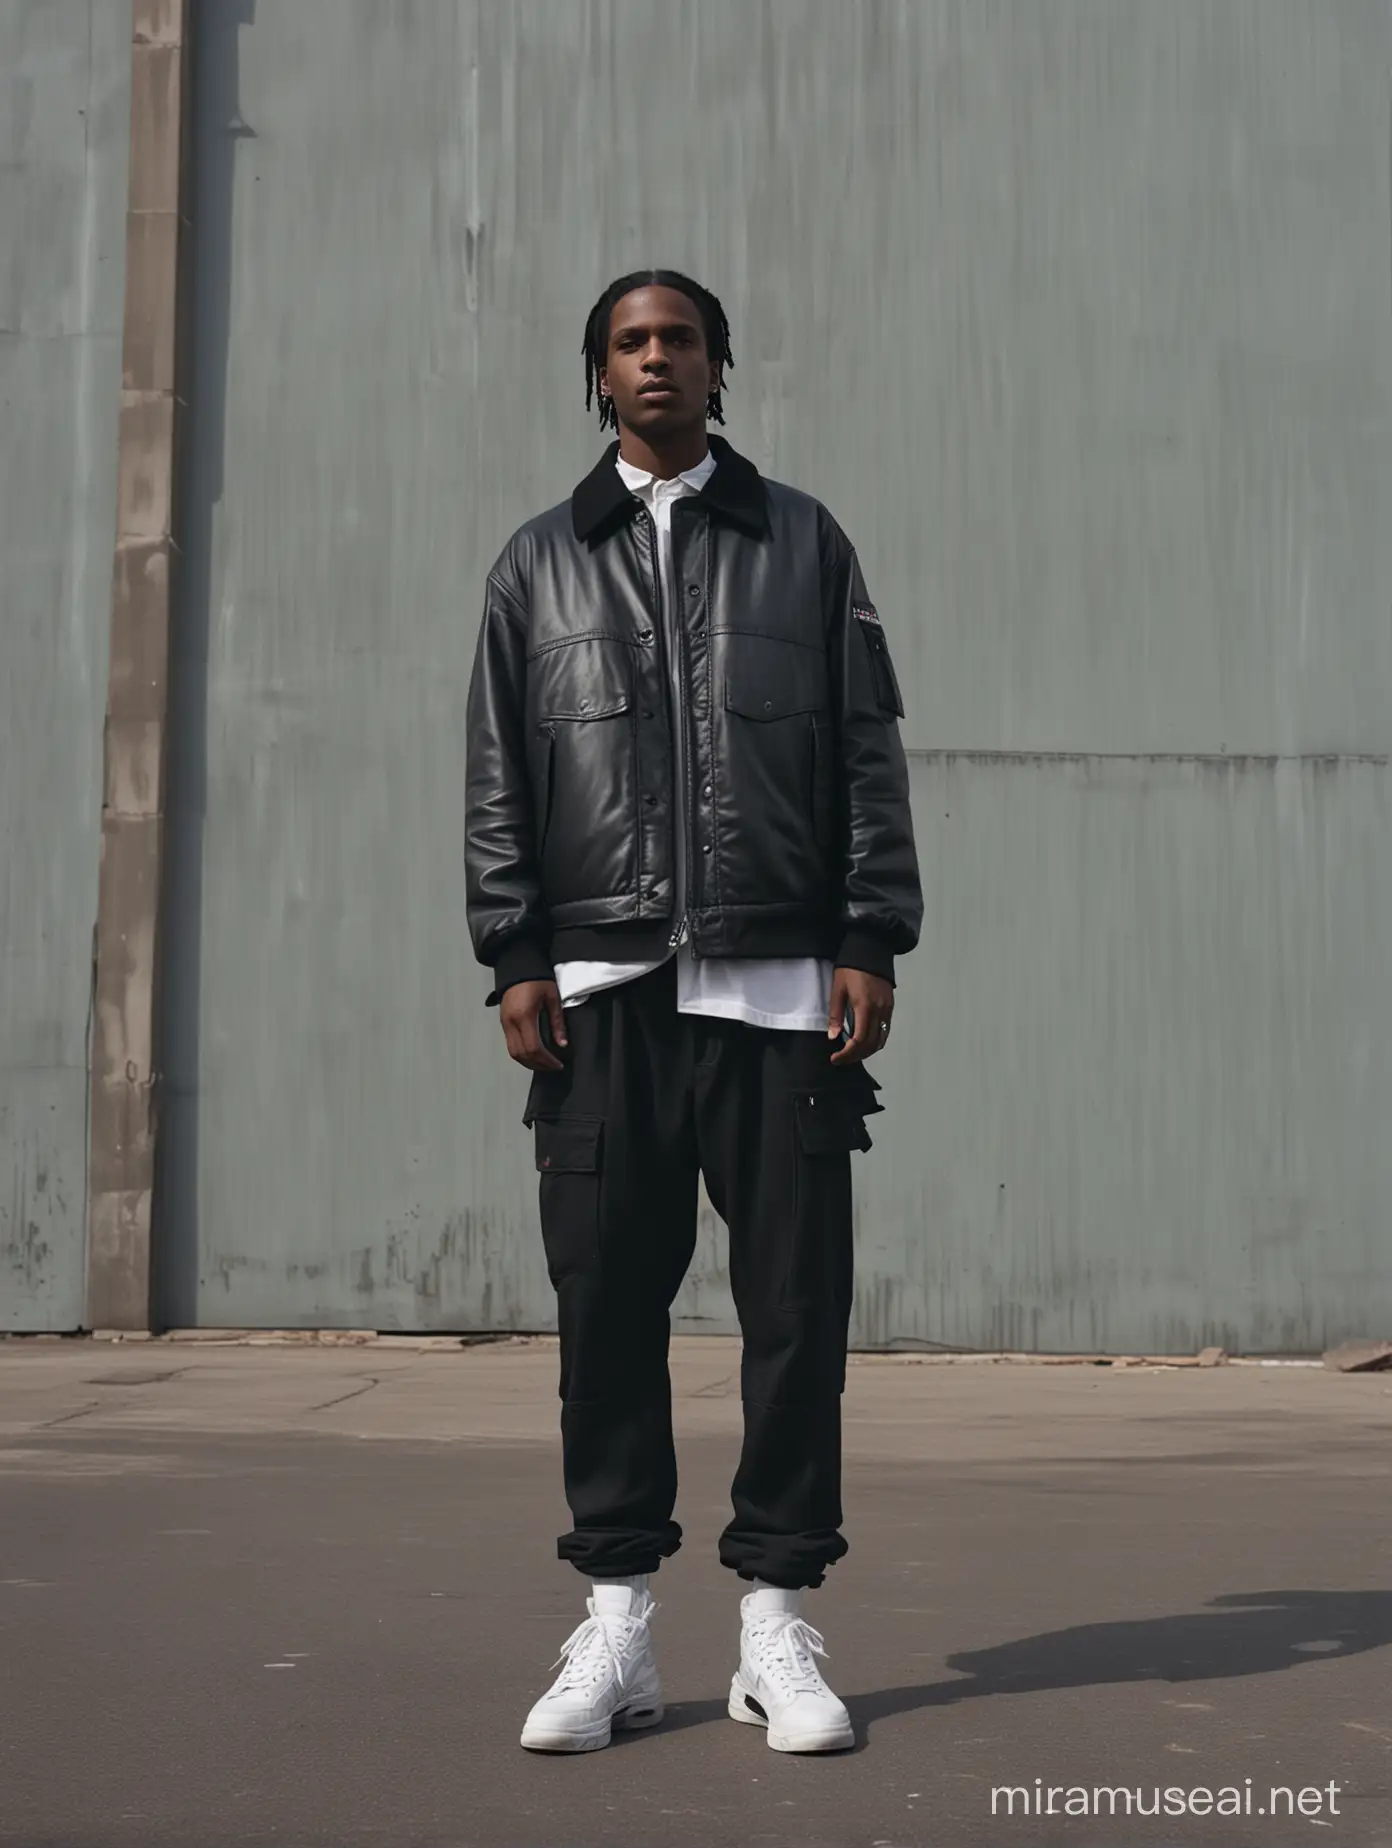 A$AP Rocky x Raf Simons: Against the industrial backdrop of a warehouse, A$AP Rocky embodies urban cool in Raf Simons' avant-garde streetwear. With each movement, Rocky's silhouette blurs against the stark architecture, captured in dynamic shots that convey a sense of raw energy and motion. Cinematic camera angles heighten the drama of the scene, while subtle haze effects soften the harsh light, adding an atmospheric quality to the urban landscape.